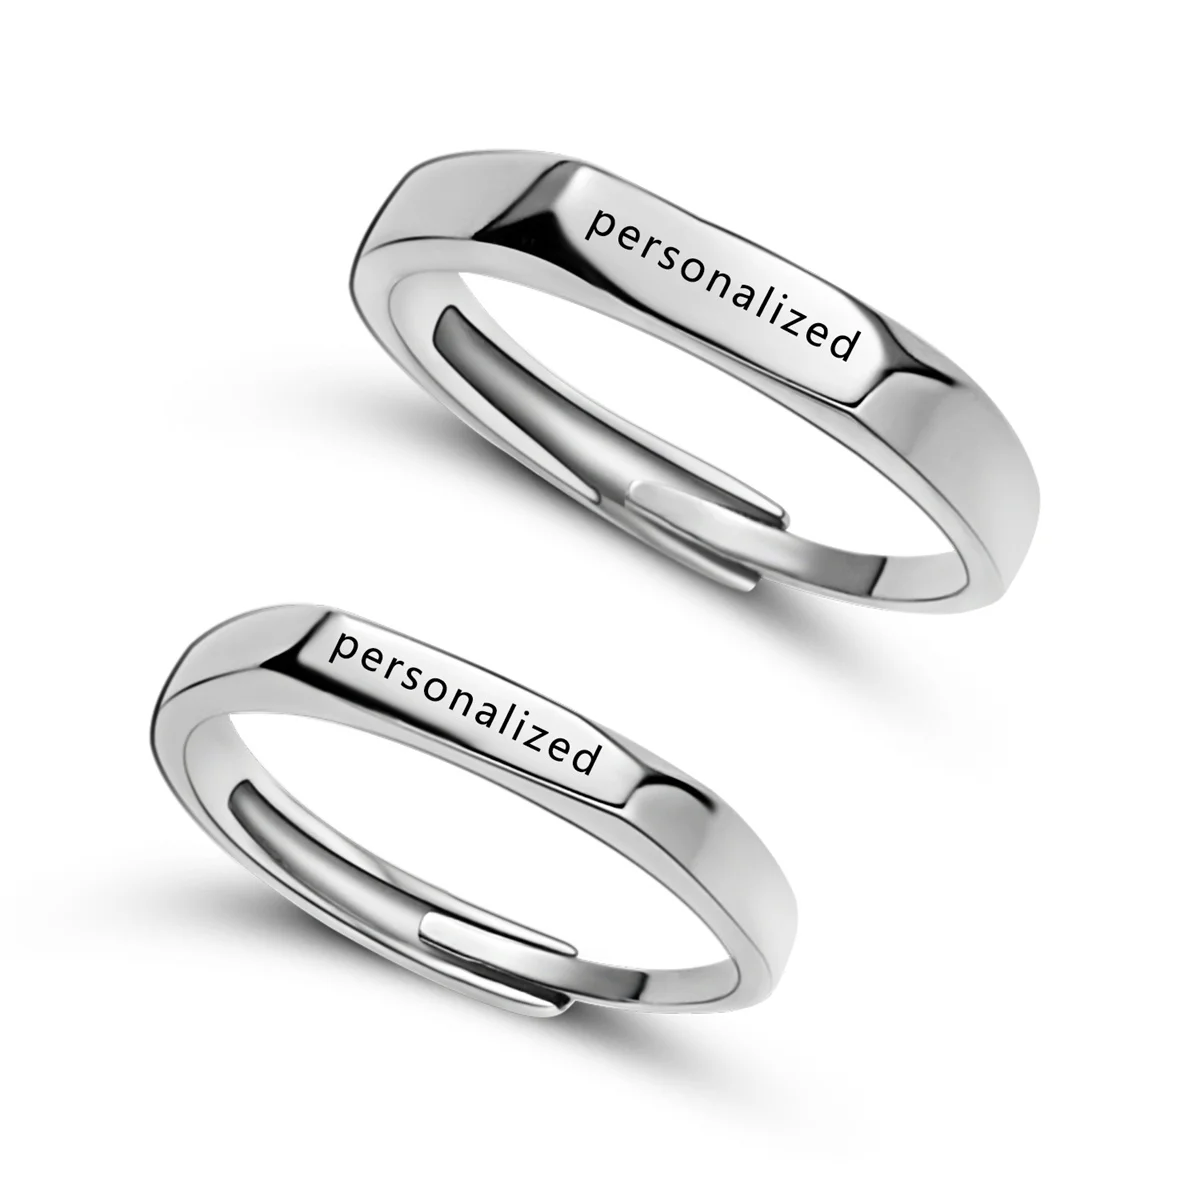 Personalized Custom Name Text Couple Rings For Women Men Stainless Steel Engraved Date Opening Ring Anniversary Gifts Jewelry